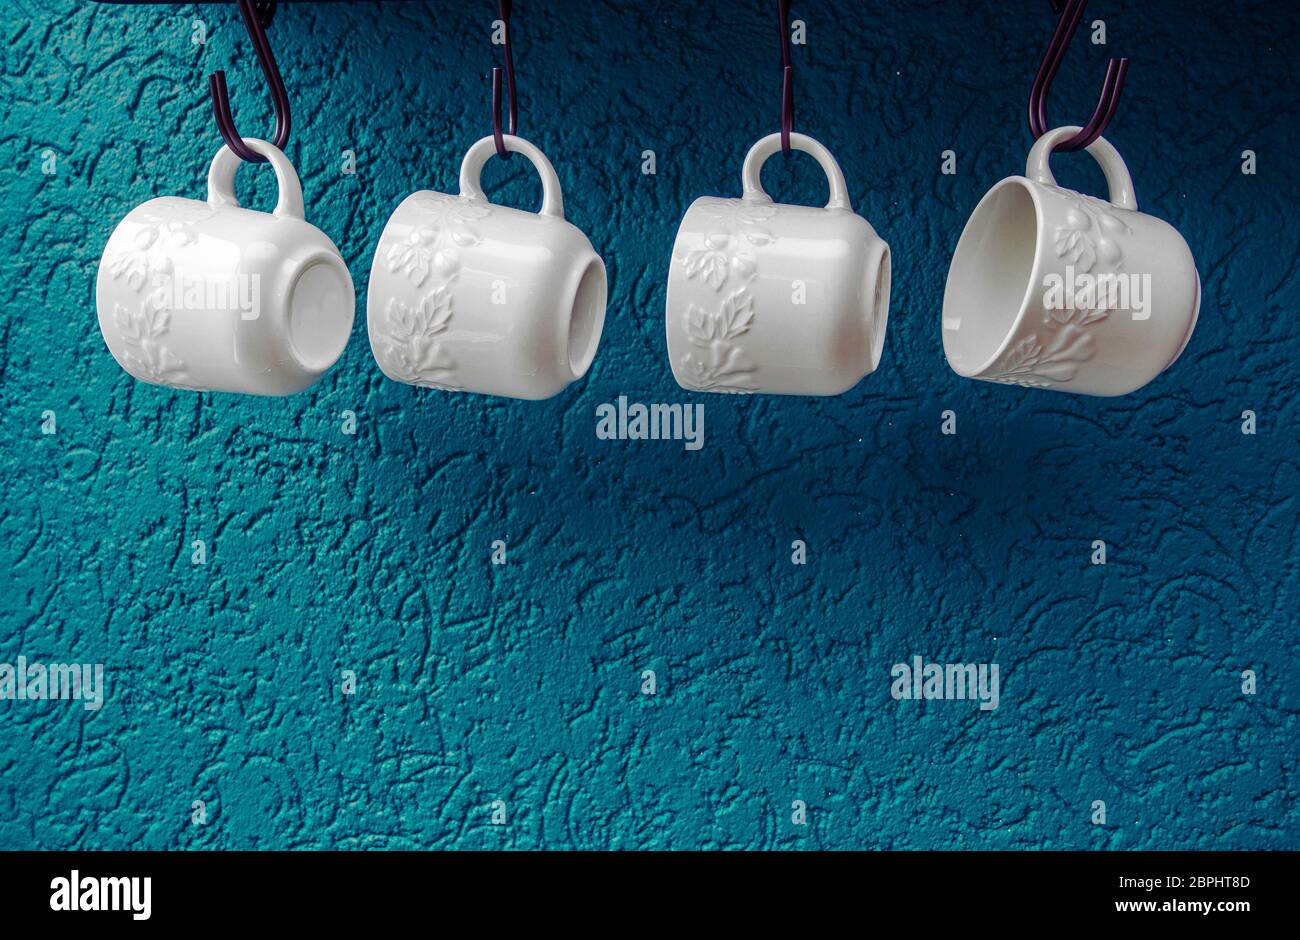 coffee cups hanging on hooks of blue kitchen wall modern interior design Stock Photo